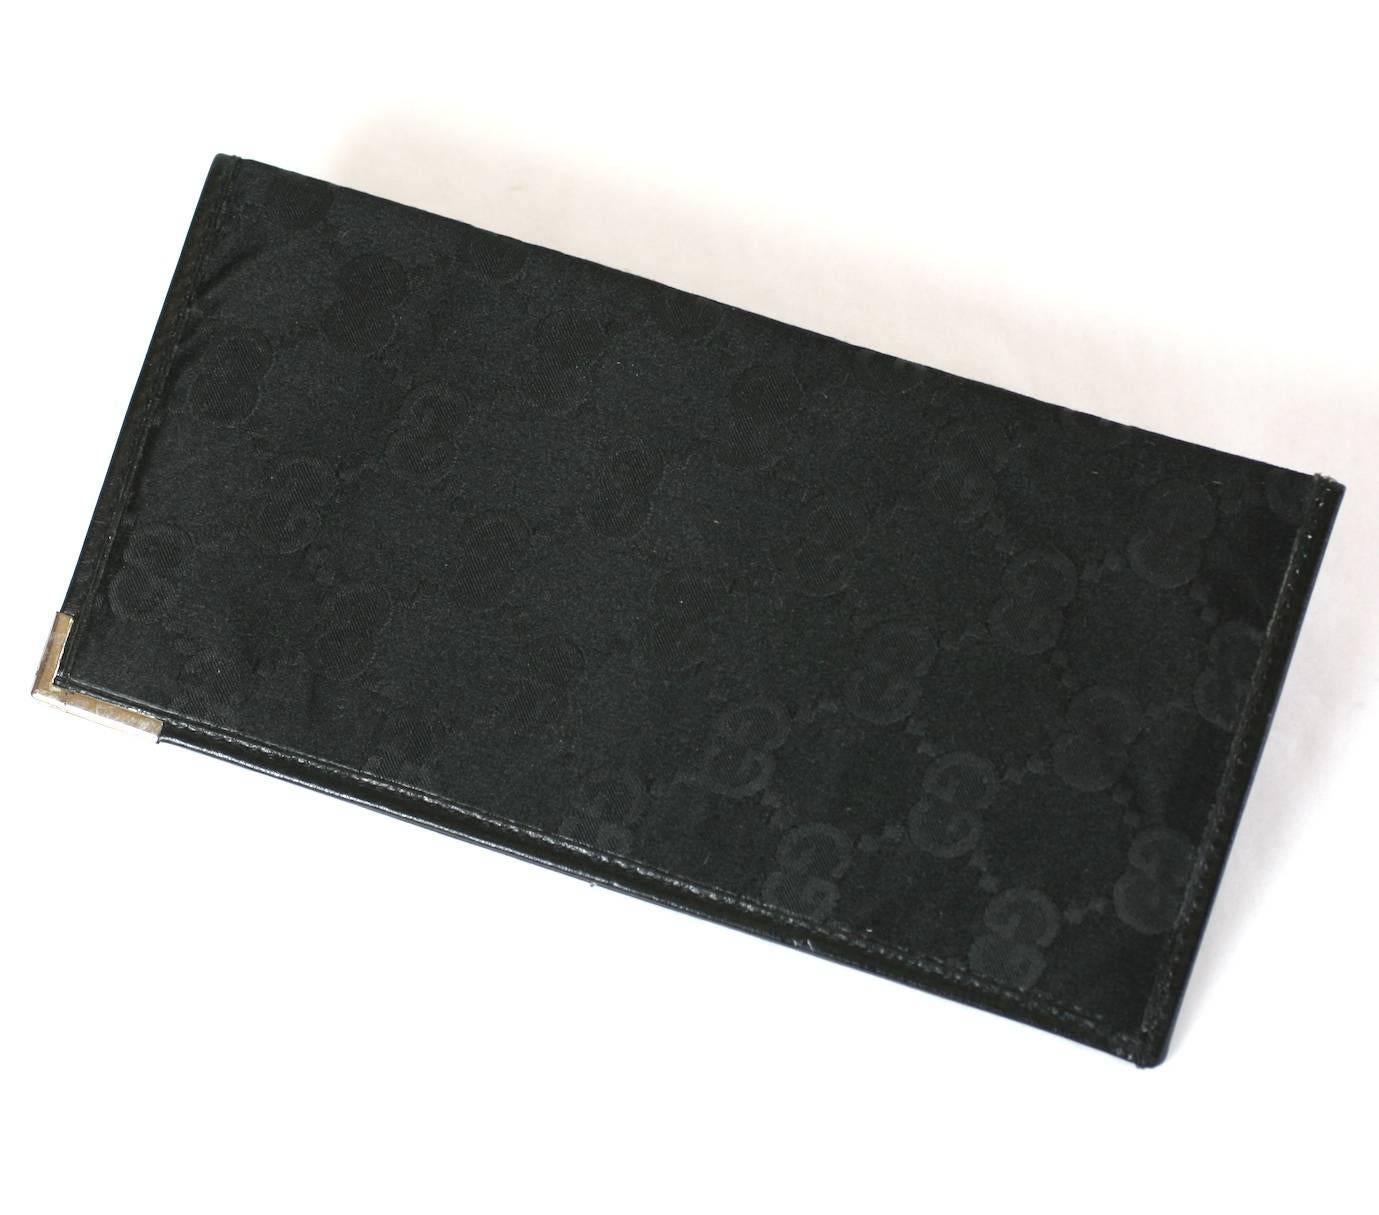 Gucci Silk Satin Logo Fold with sterling tipped corner, for holding cash or papers in an elegant manner. Logo 